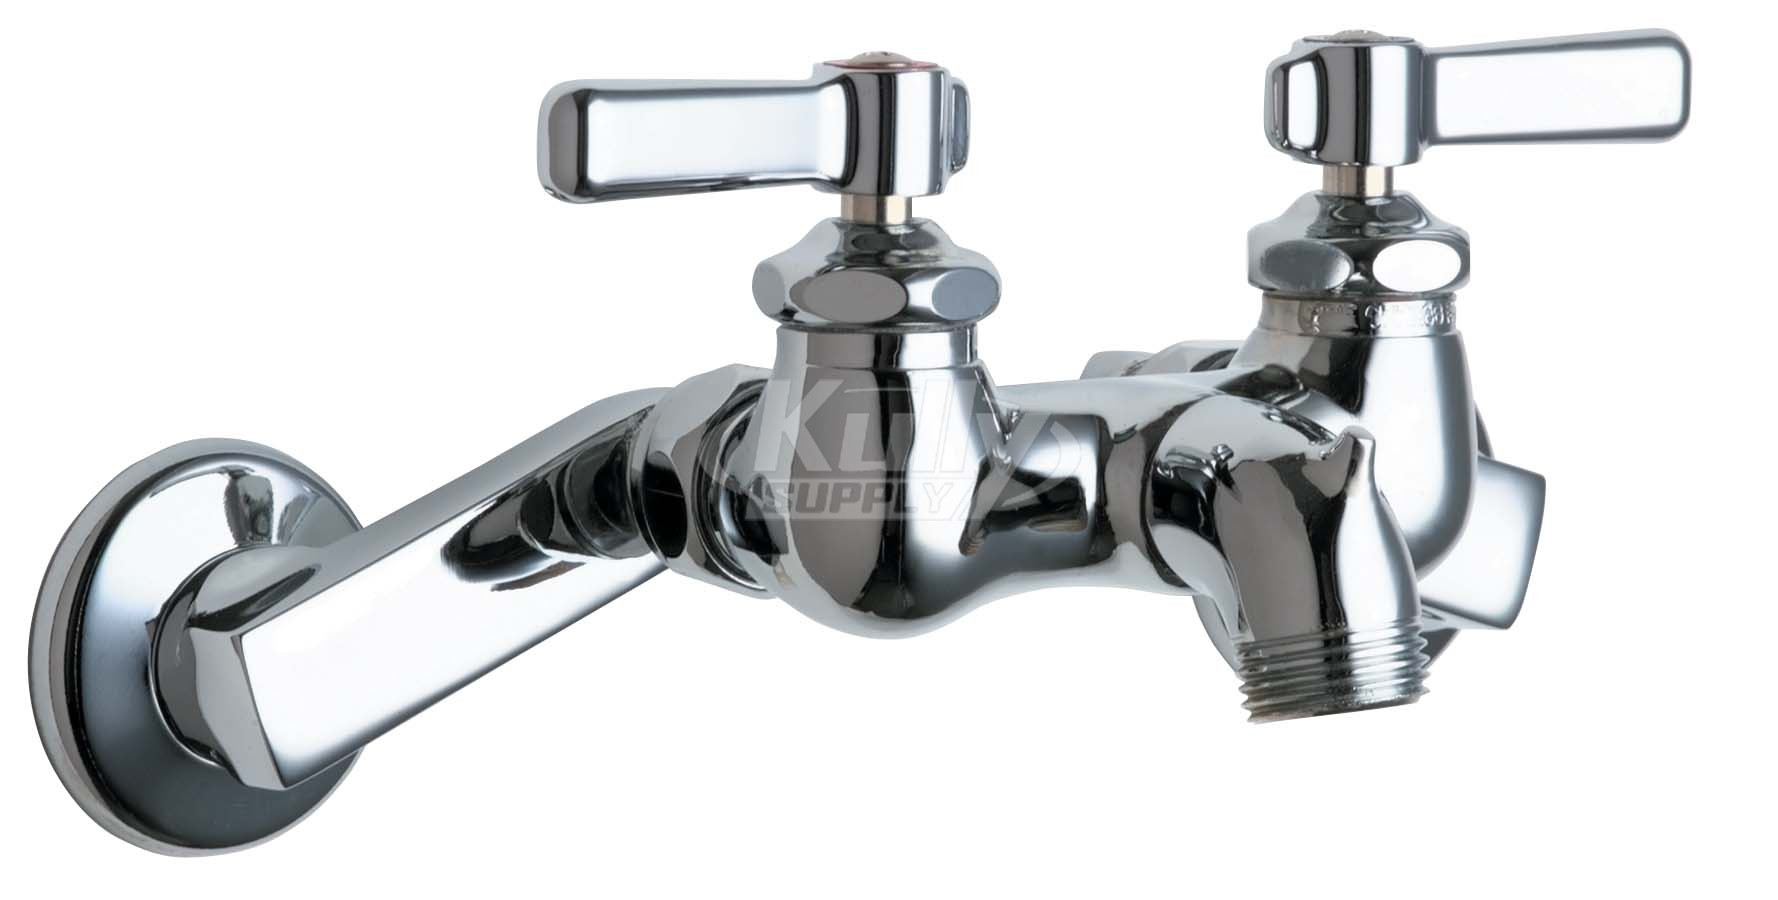 Chicago 305-CP Service Sink Faucet